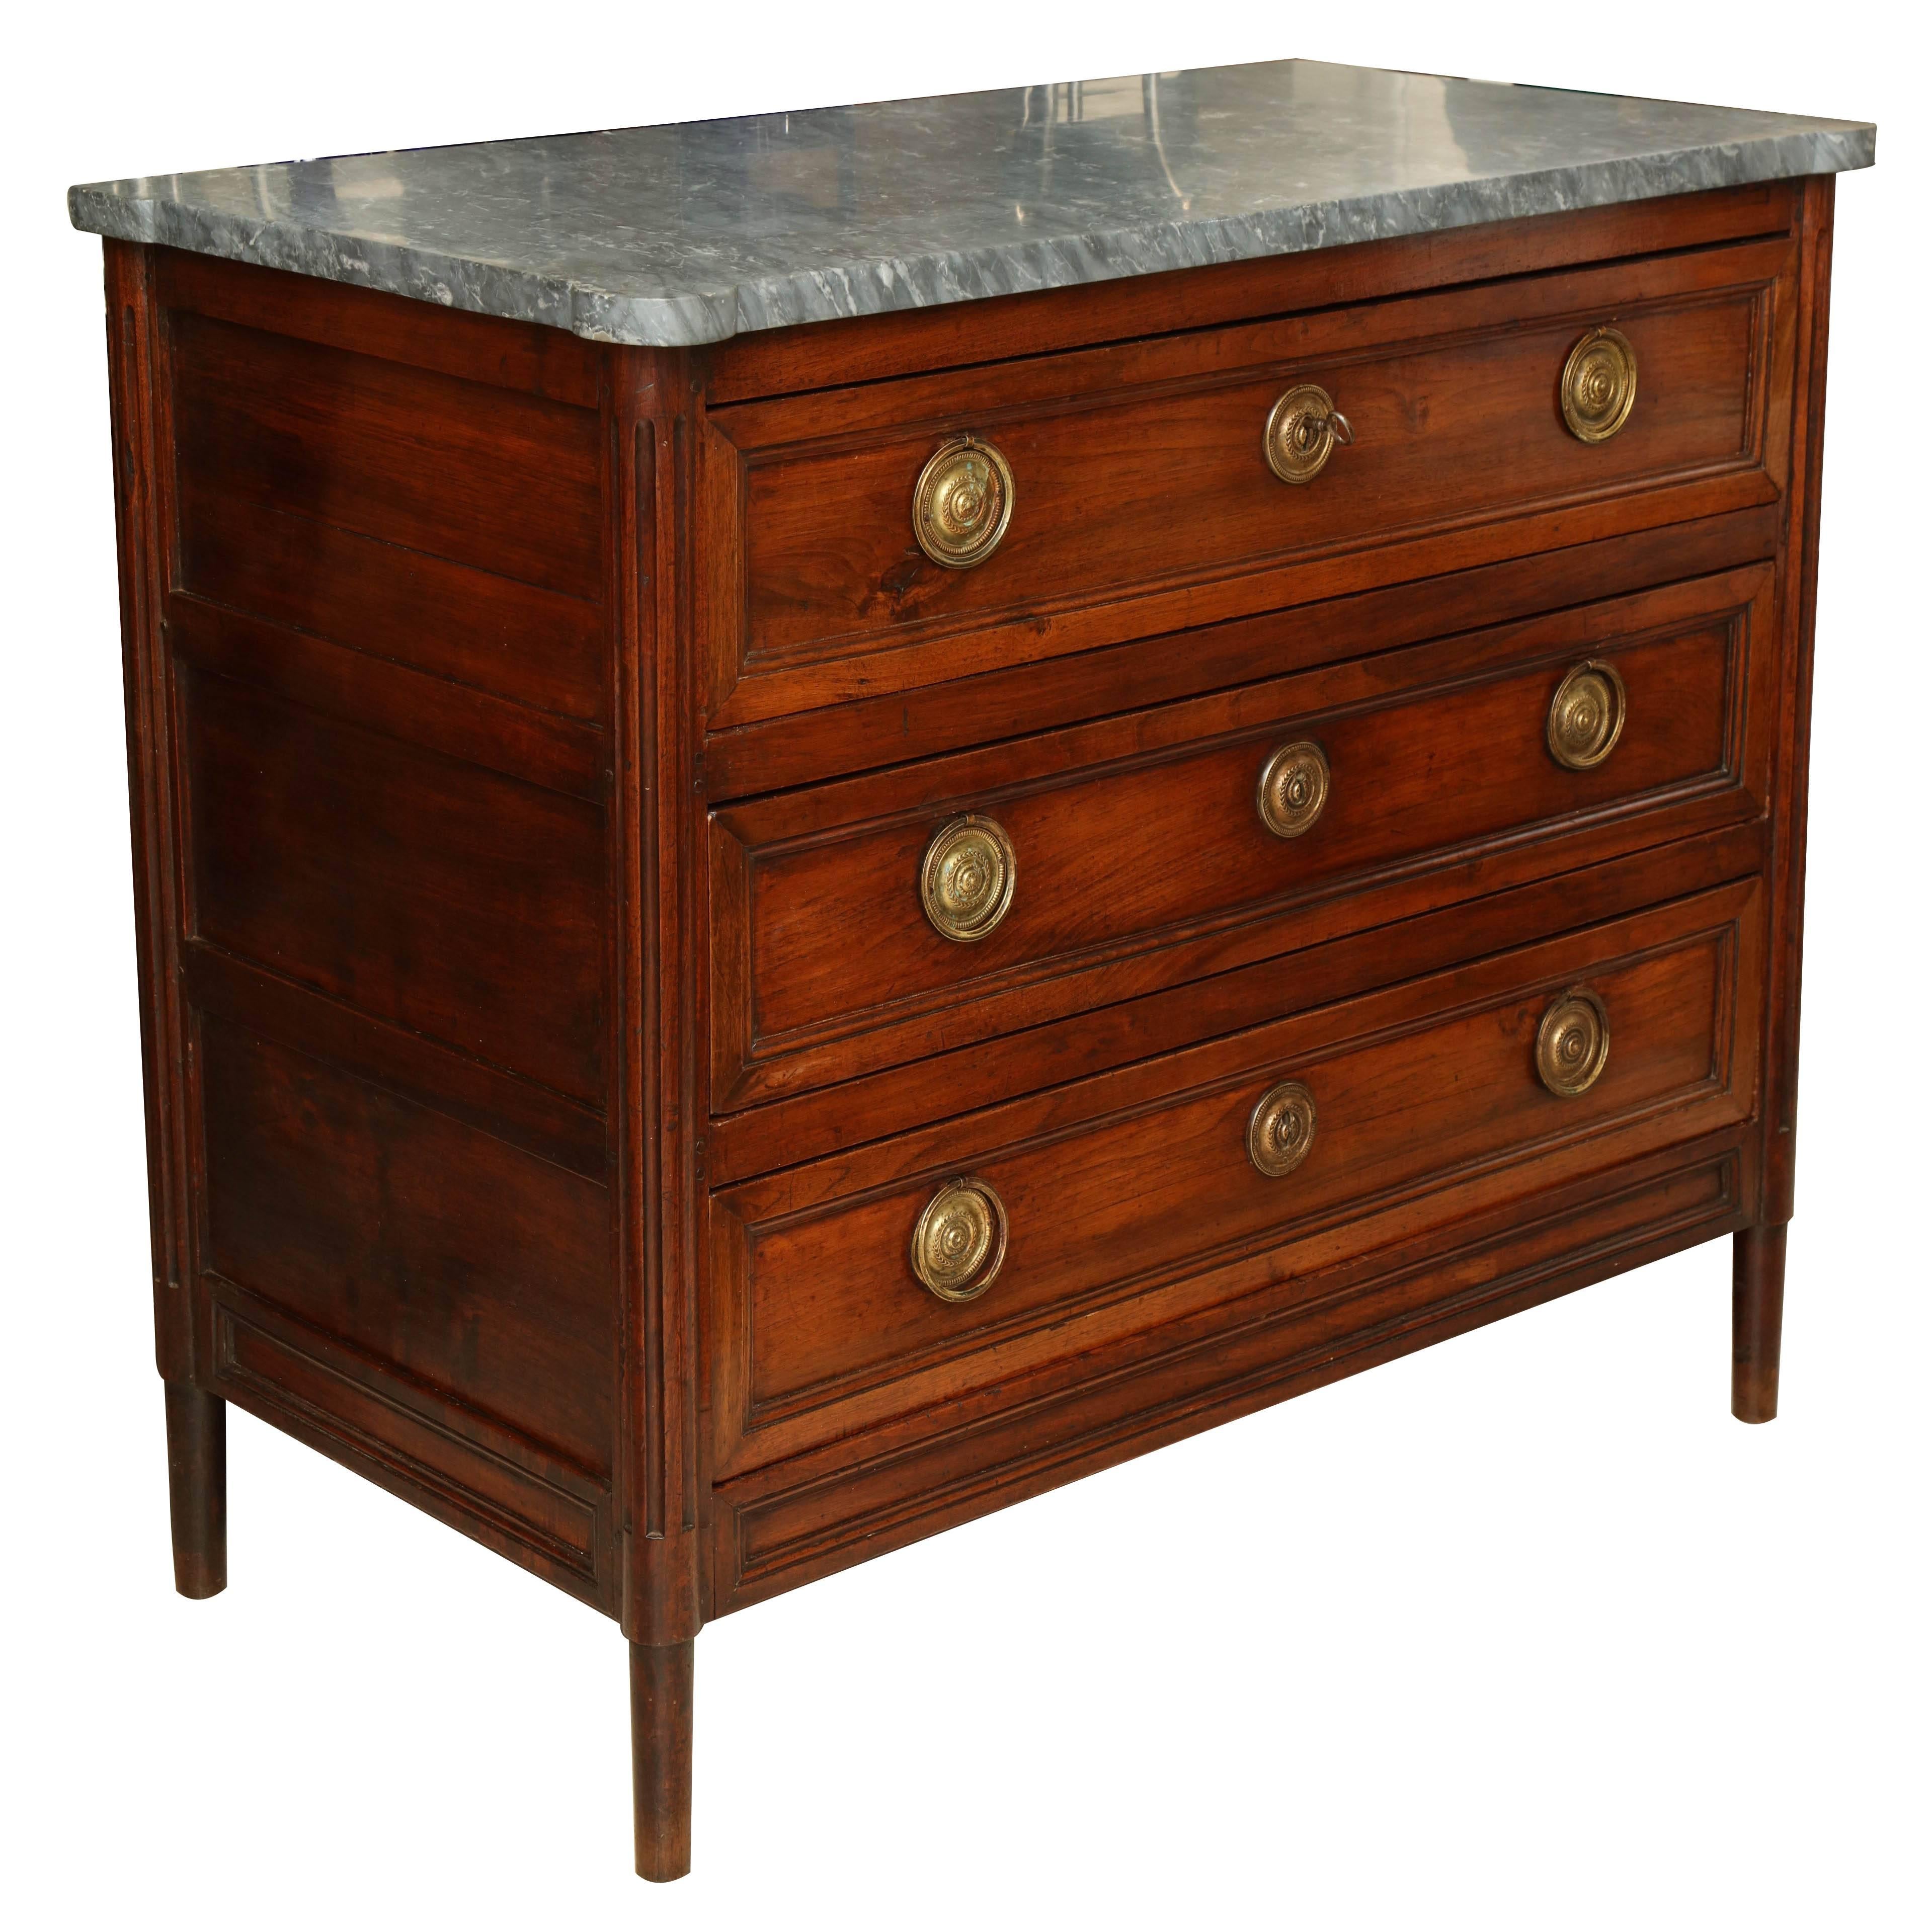 French 18th Century Walnut Commode with Three Drawers and Gray Marble Top